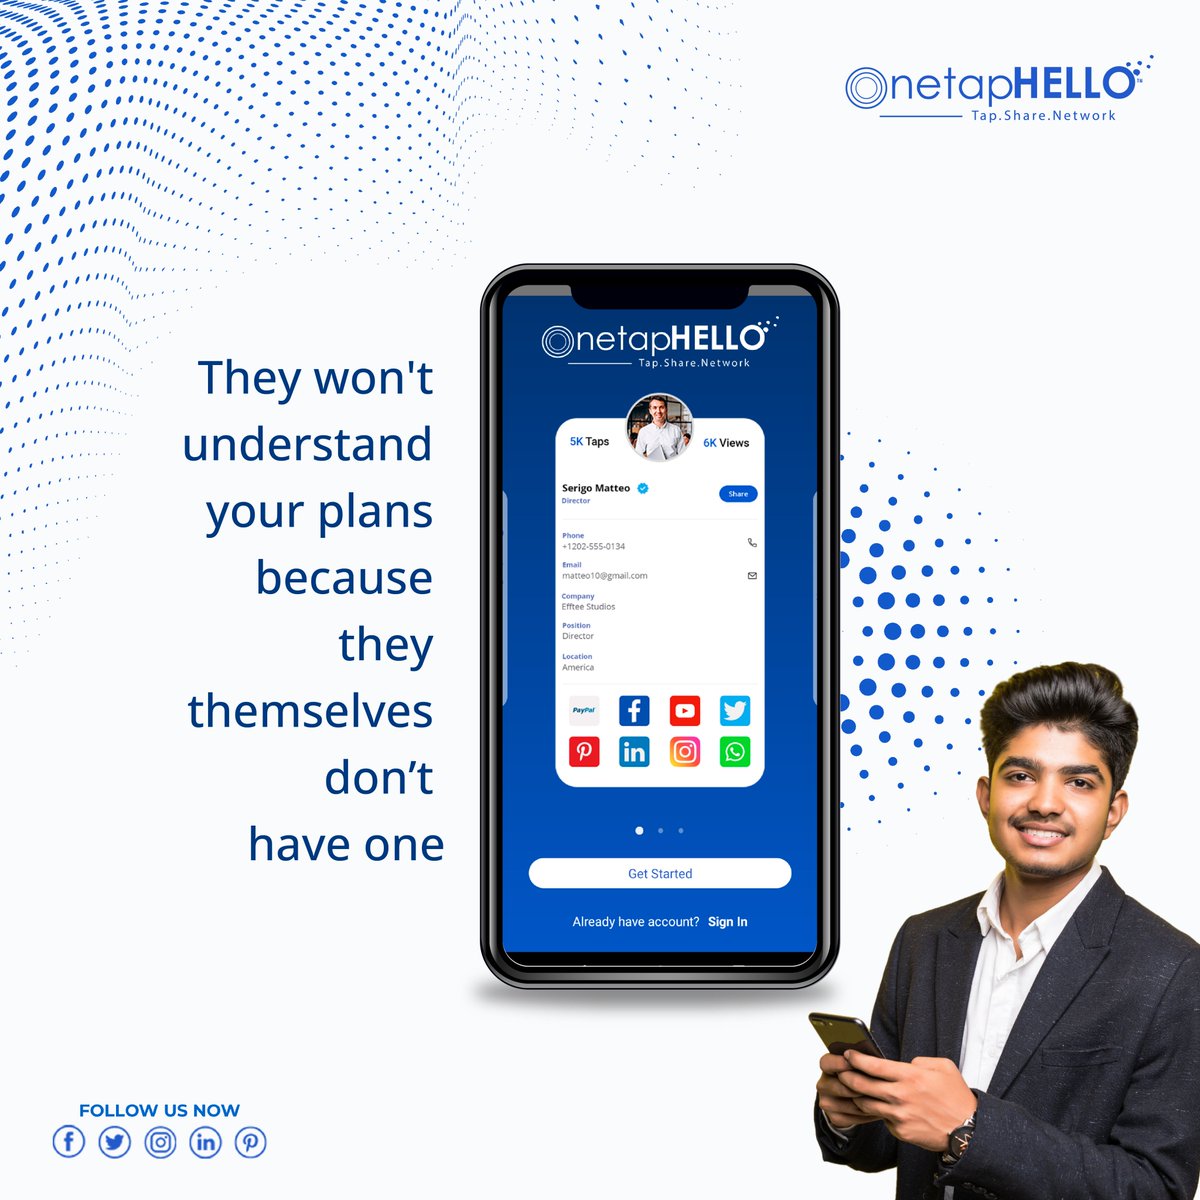 They won't understand your plans because they  themselves don’t have one.

Caption : Be a smart planner.! OnetapHELLO helps you to grow your  business and contacts with just the TAP.
.
.
.
#onetaphello #nextgencard #tap #share #network #growmore #connectinstantly #networking